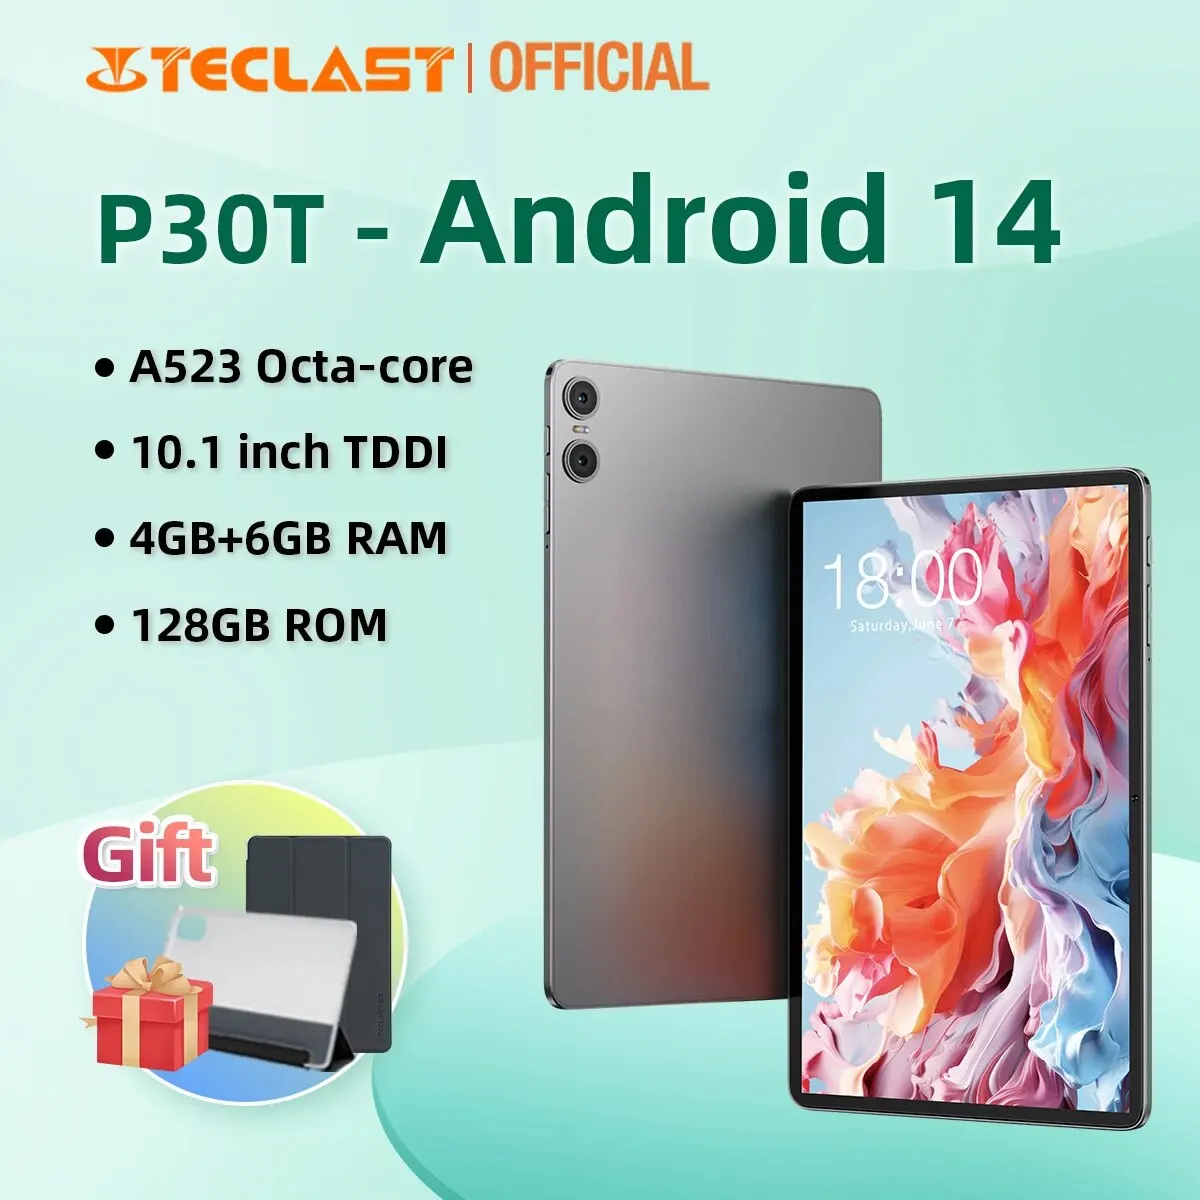 Teclast P30T Android 14 Tablet 10.1'' Incell Fully Laminated A523 8-core 4GB+6GB RAM 128GB ROM Wi-Fi 6 Type-C 6000mAh 3.5mm Jack